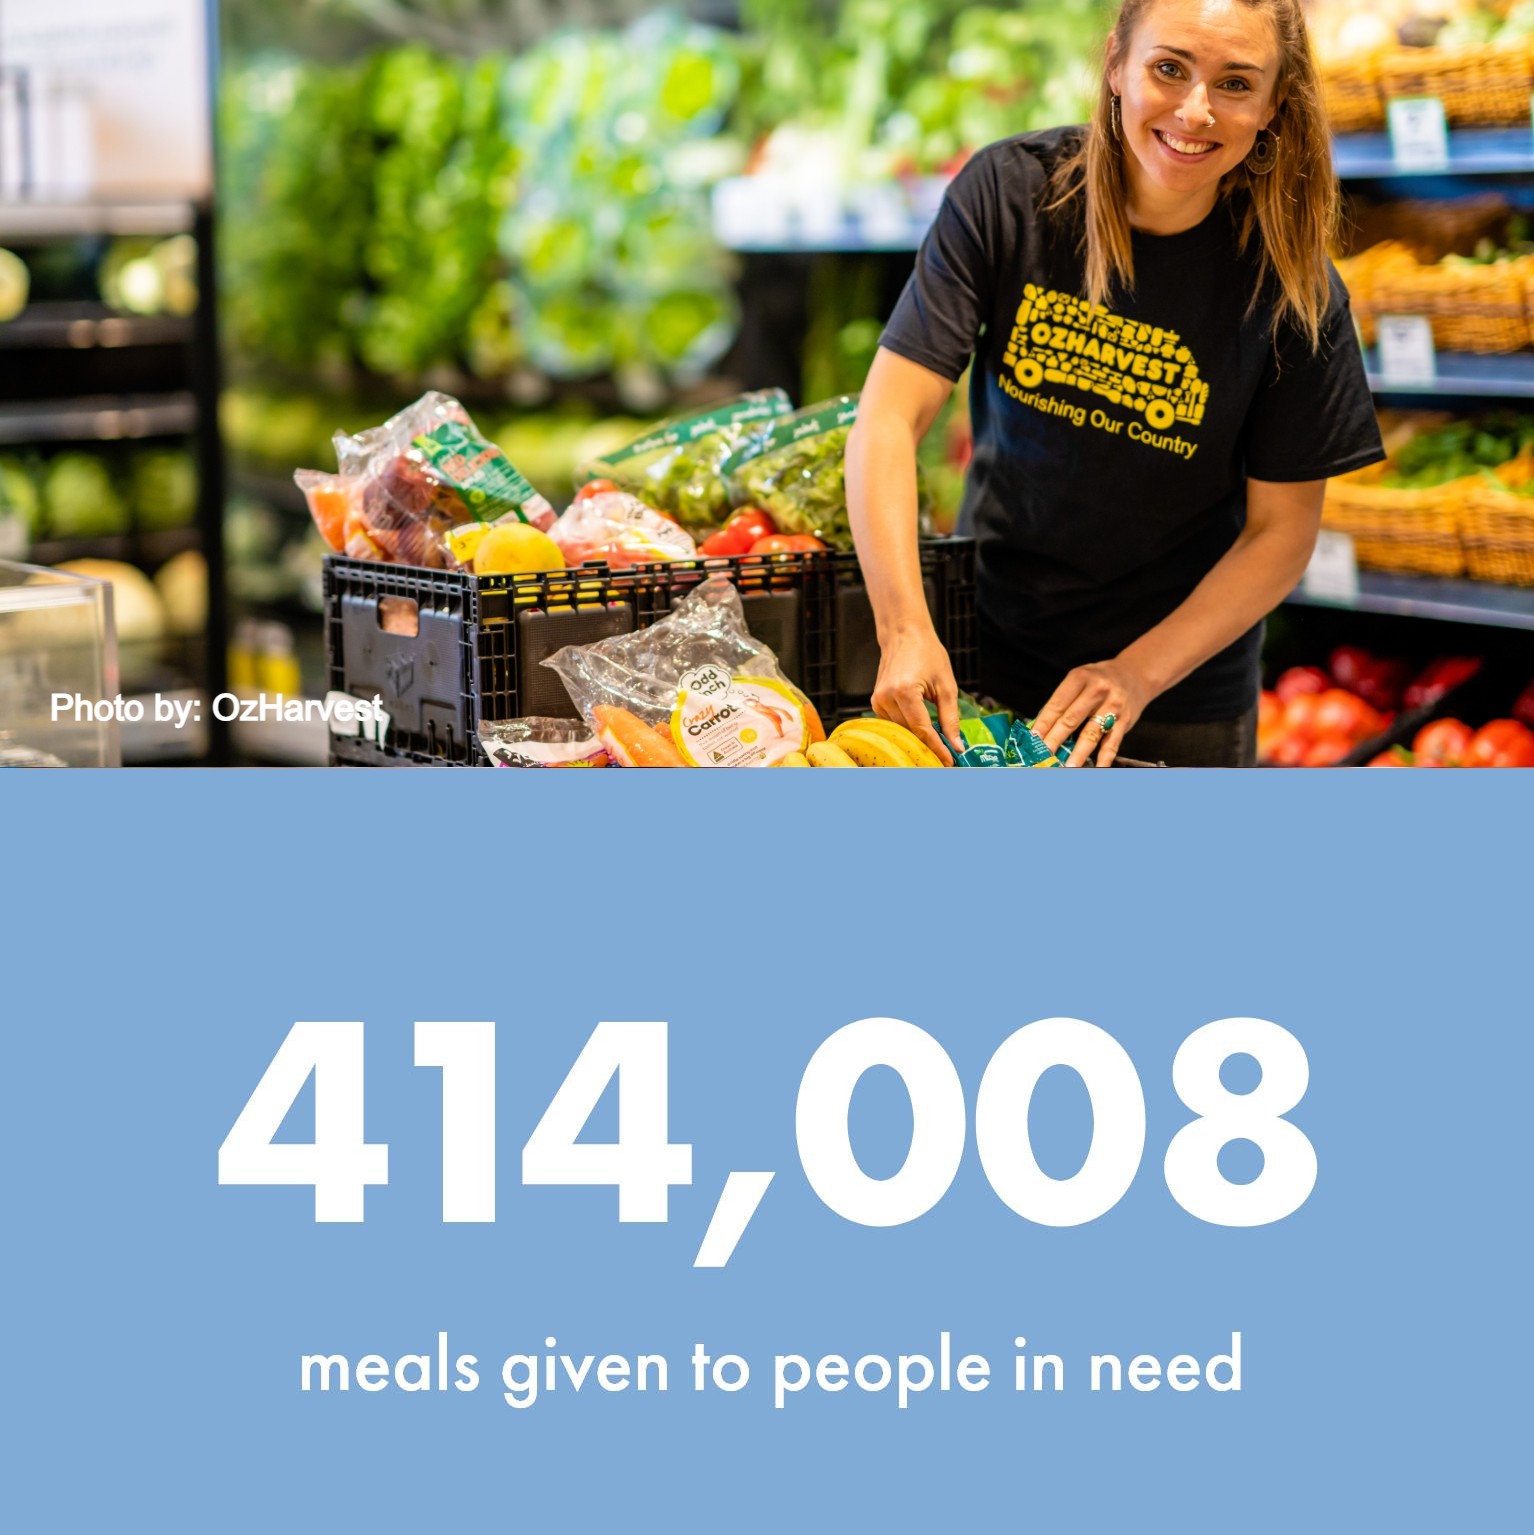 oxo fact 414,008 meals given to people in need